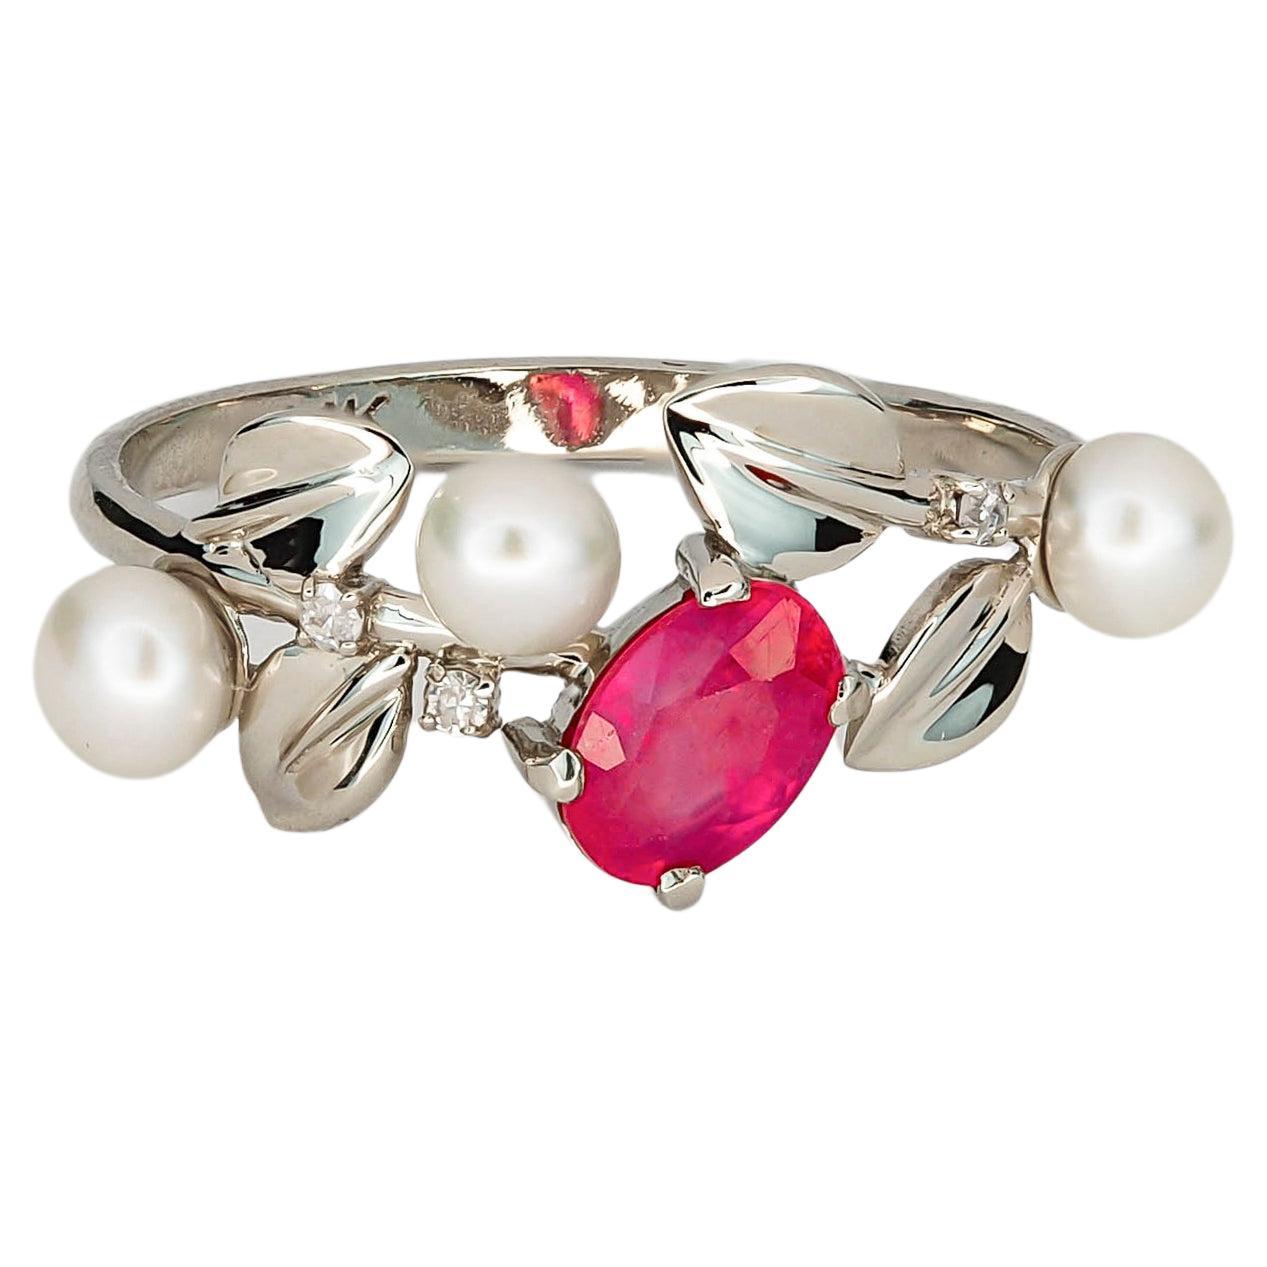 14k Gold Ring with Ruby, Pearls and Diamonds